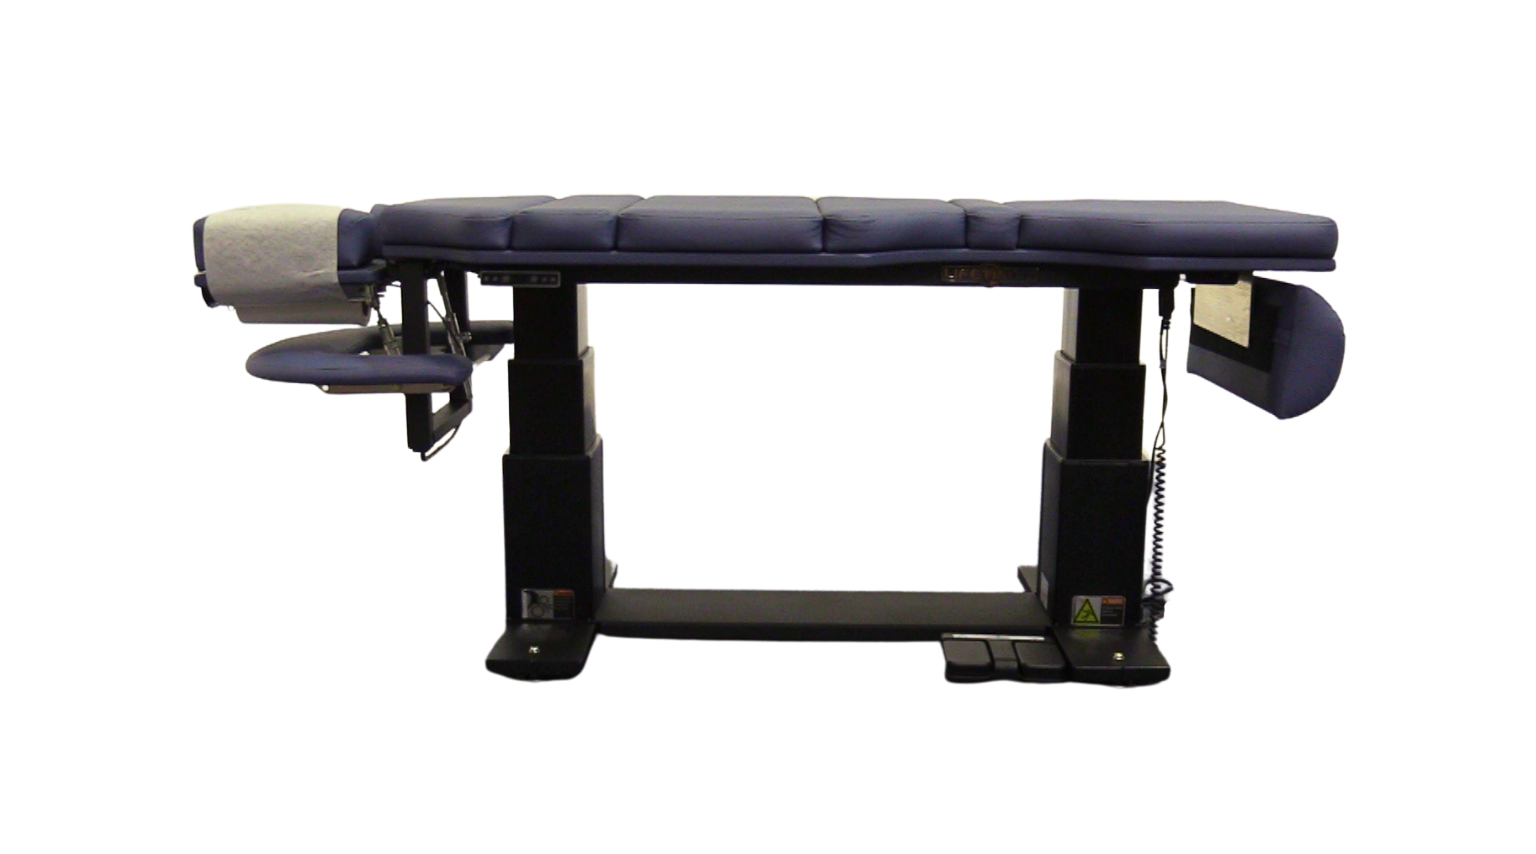 Lifetimer International Blue LT-ME3 2.0 Chiropractic Table in the raised height position